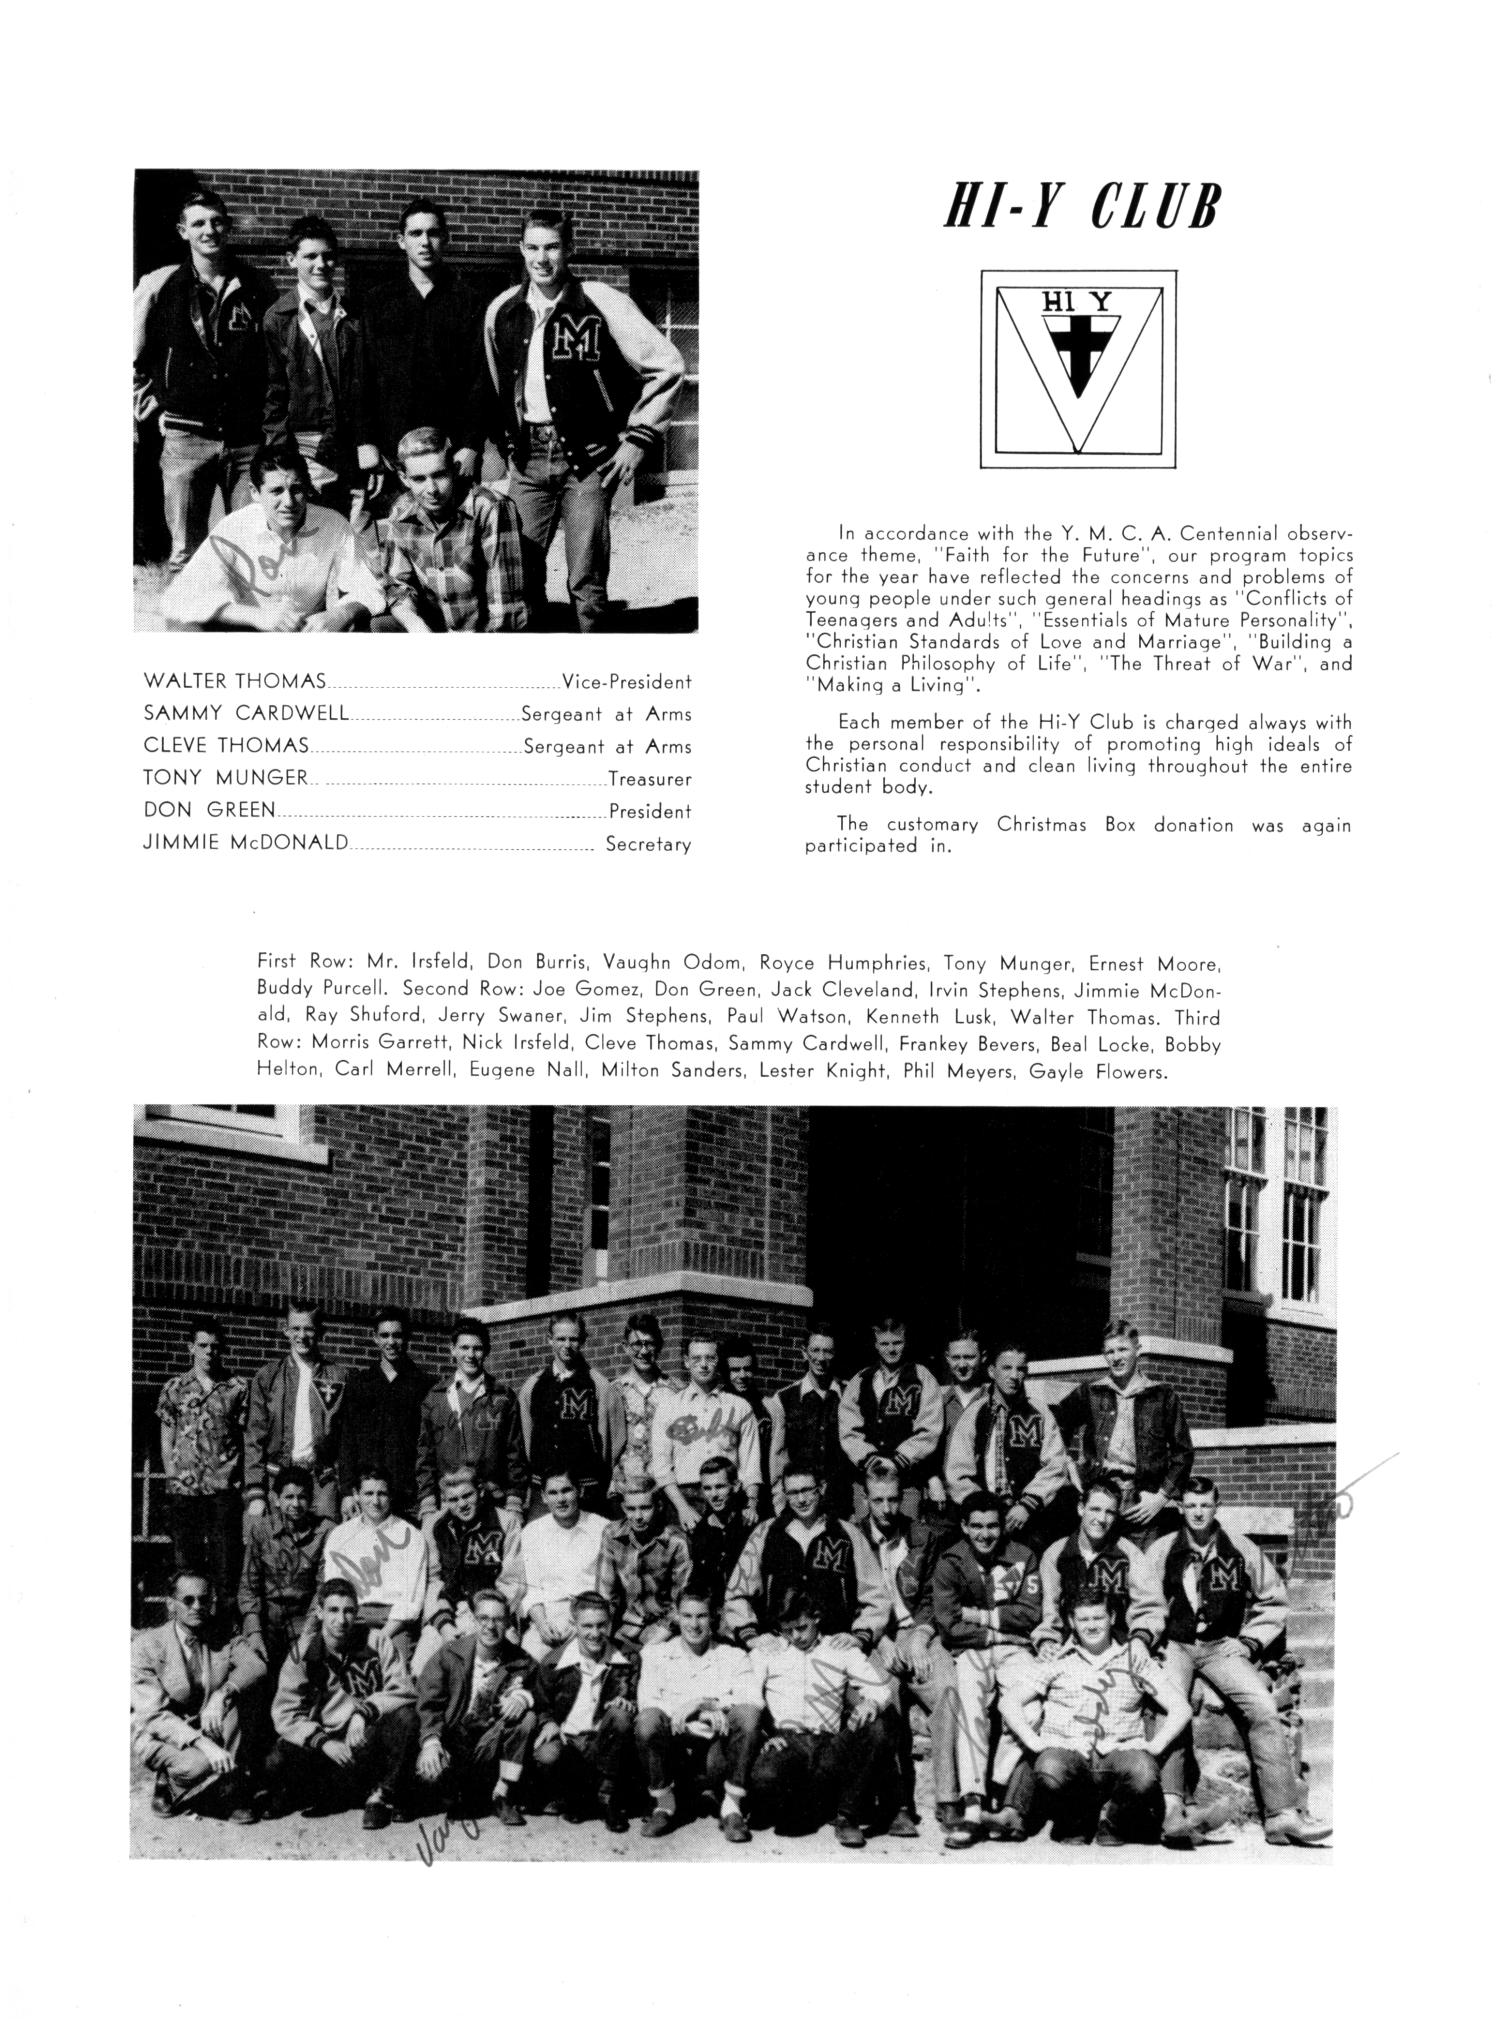 The Burro, Yearbook of Mineral Wells High School, 1953
                                                
                                                    76
                                                